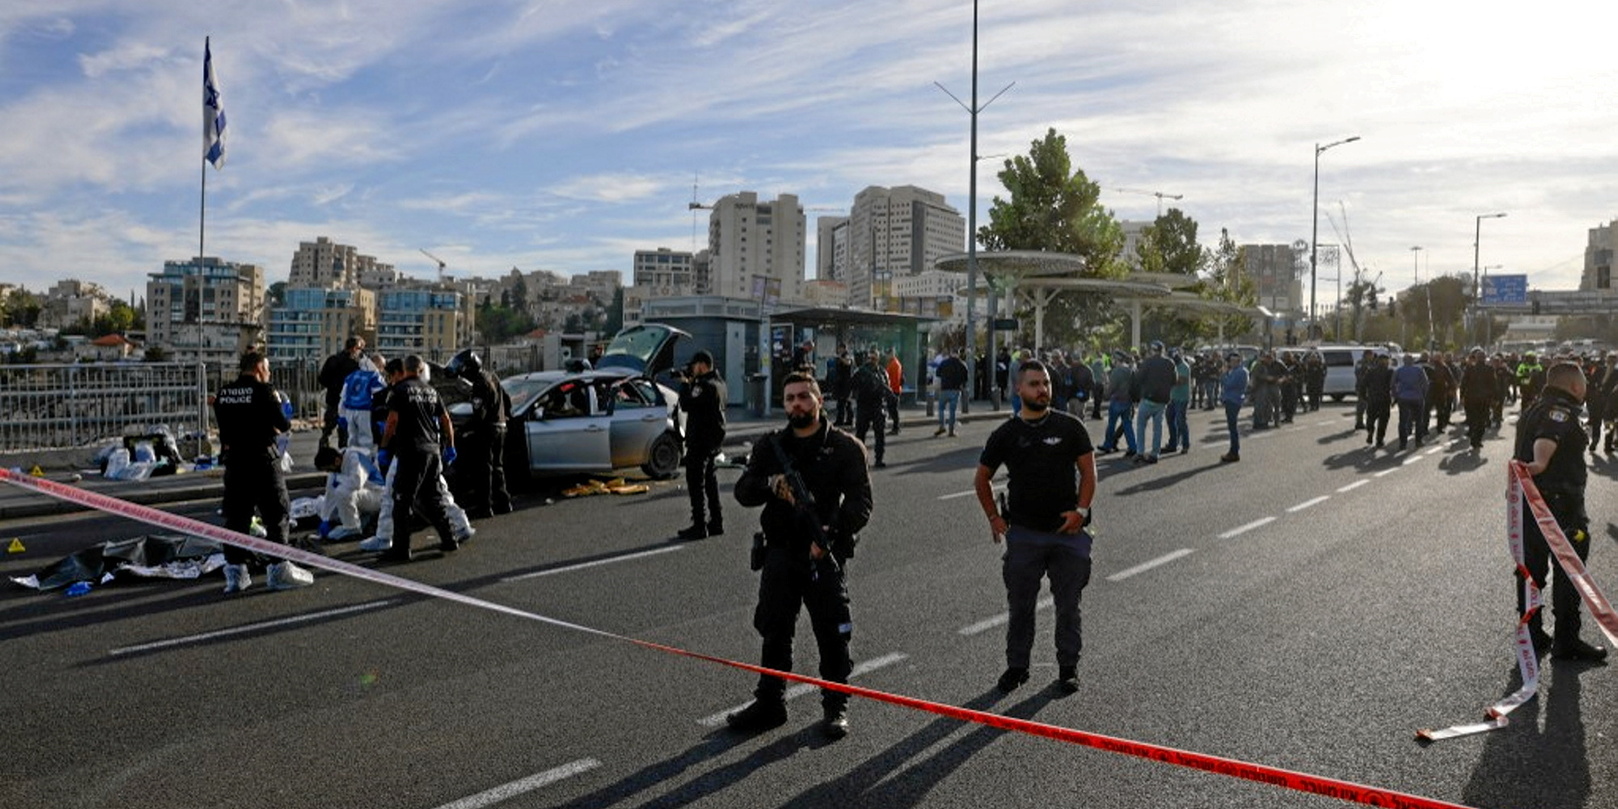 Attack in Jerusalem leaves 2 dead and 8 injured, 5 of them seriously